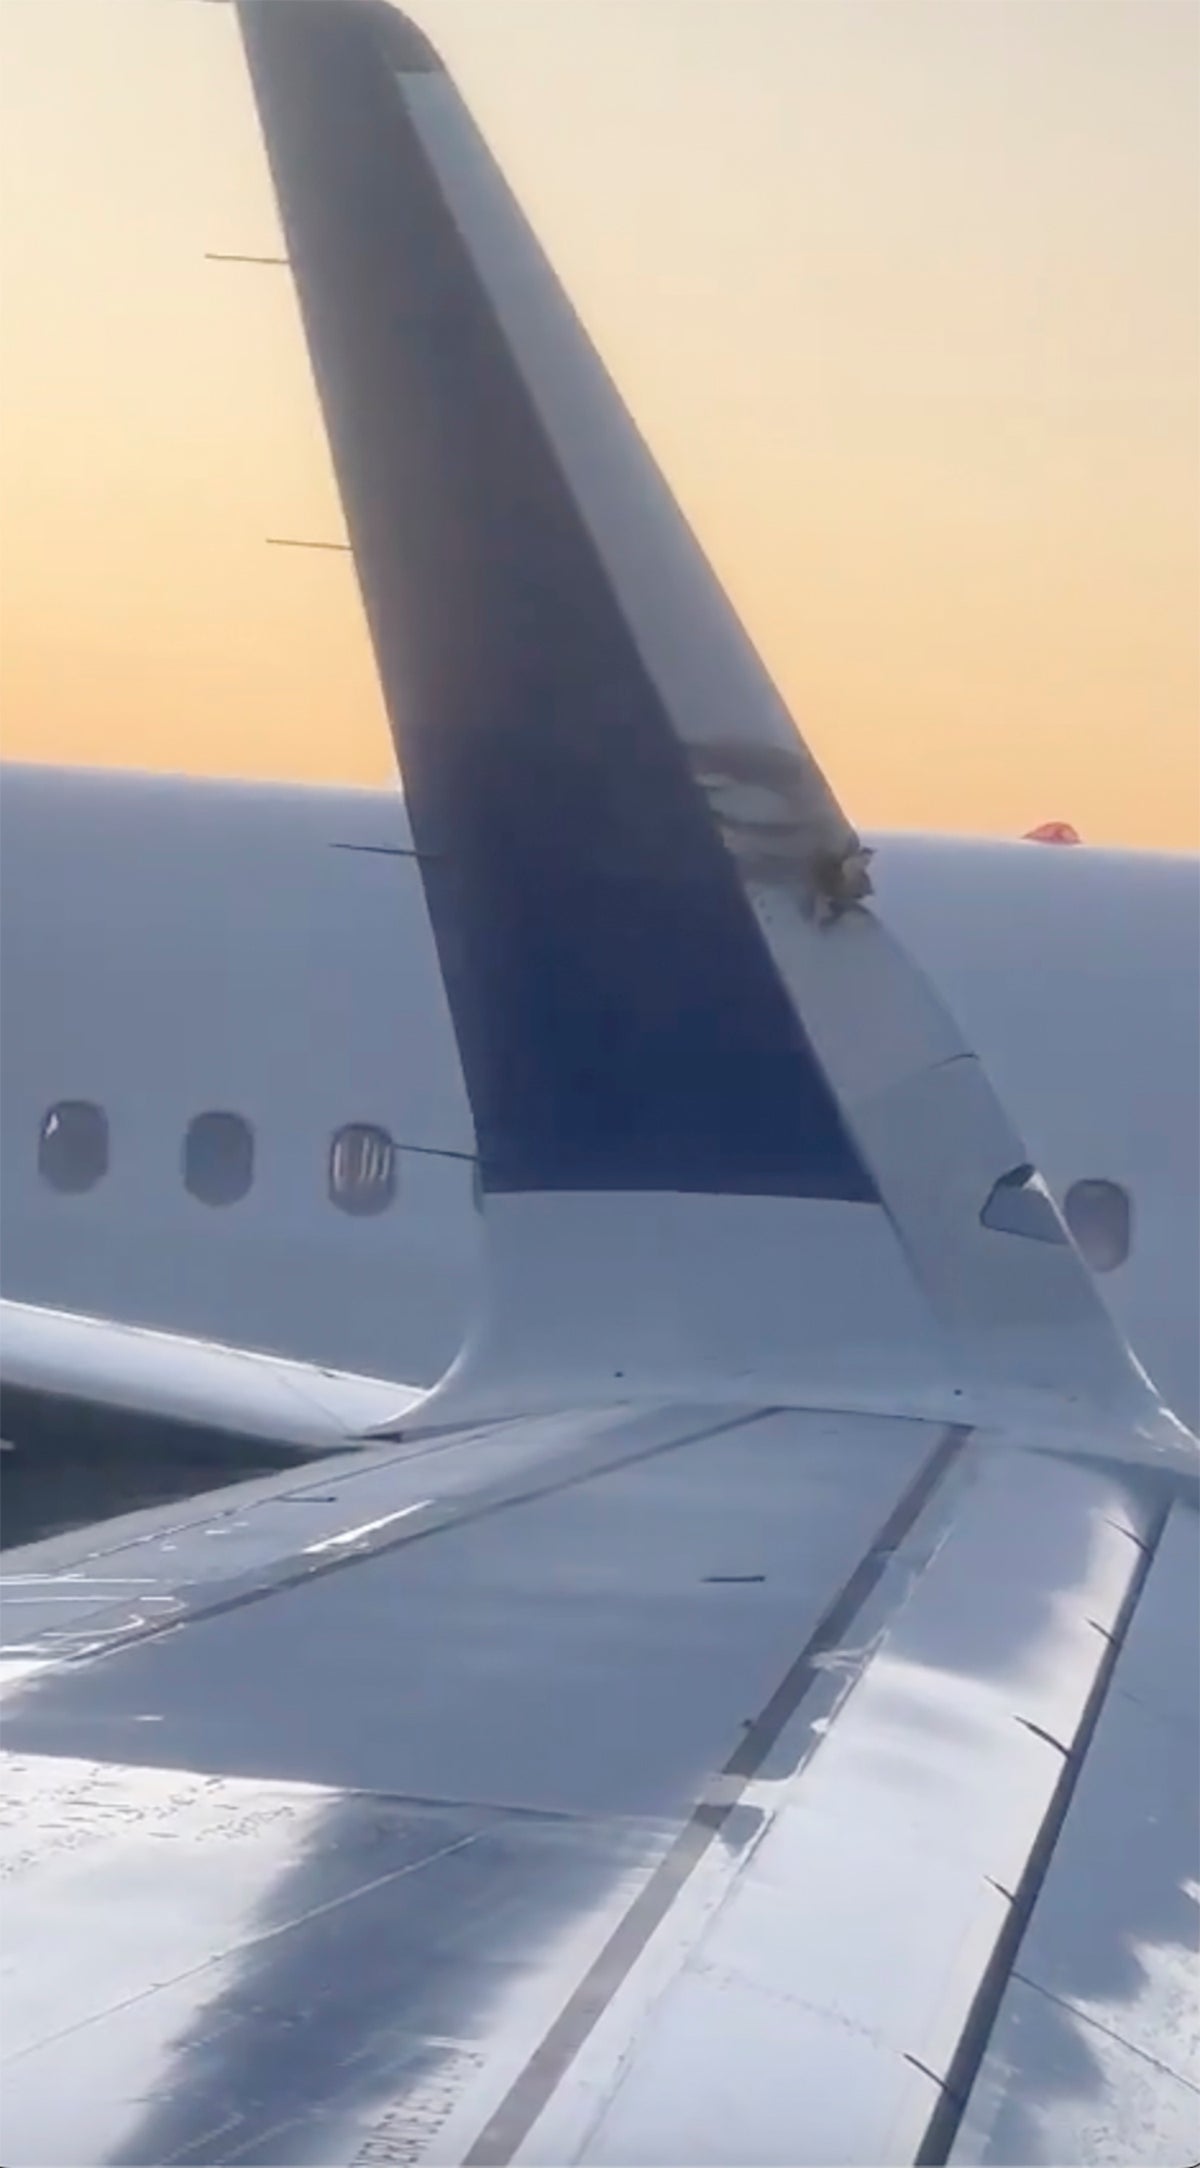 2 JetBlue planes make contact at Logan Airport, wingtip touches tail